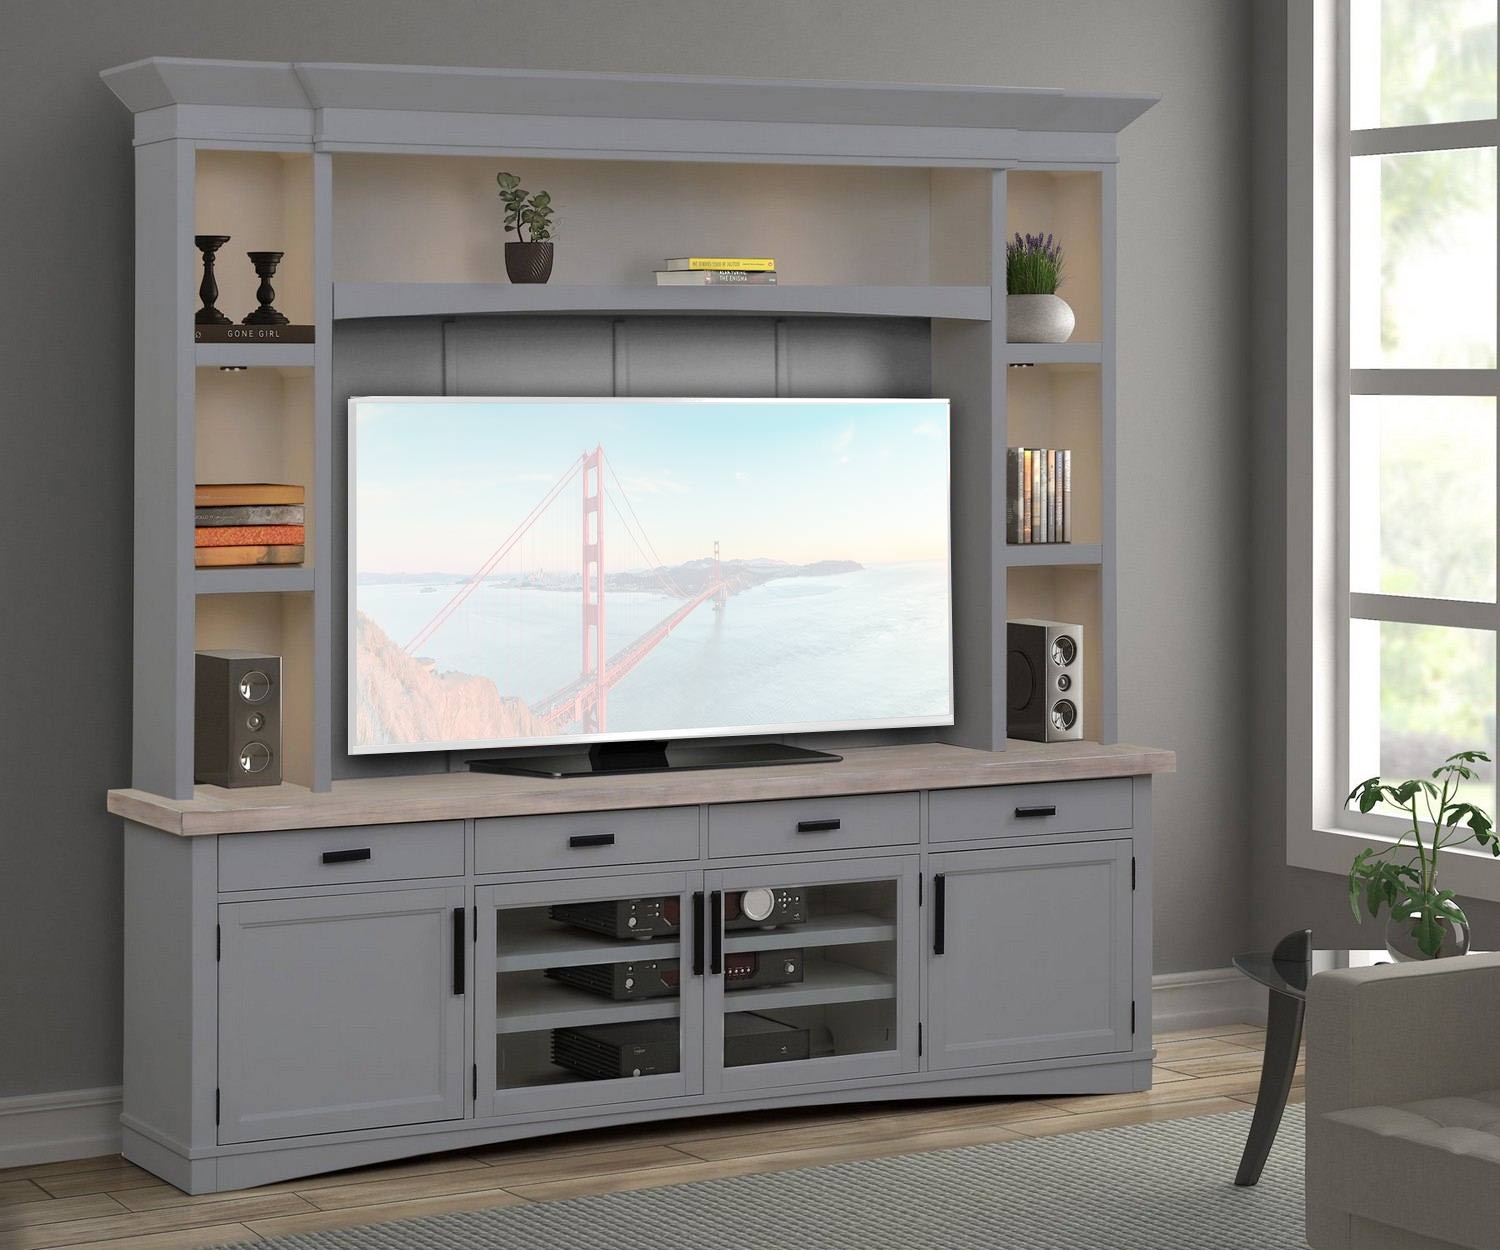 Parker House Americana Modern 92 Inch TV Console with Hutch, Backpanel and LED Lights - Dove